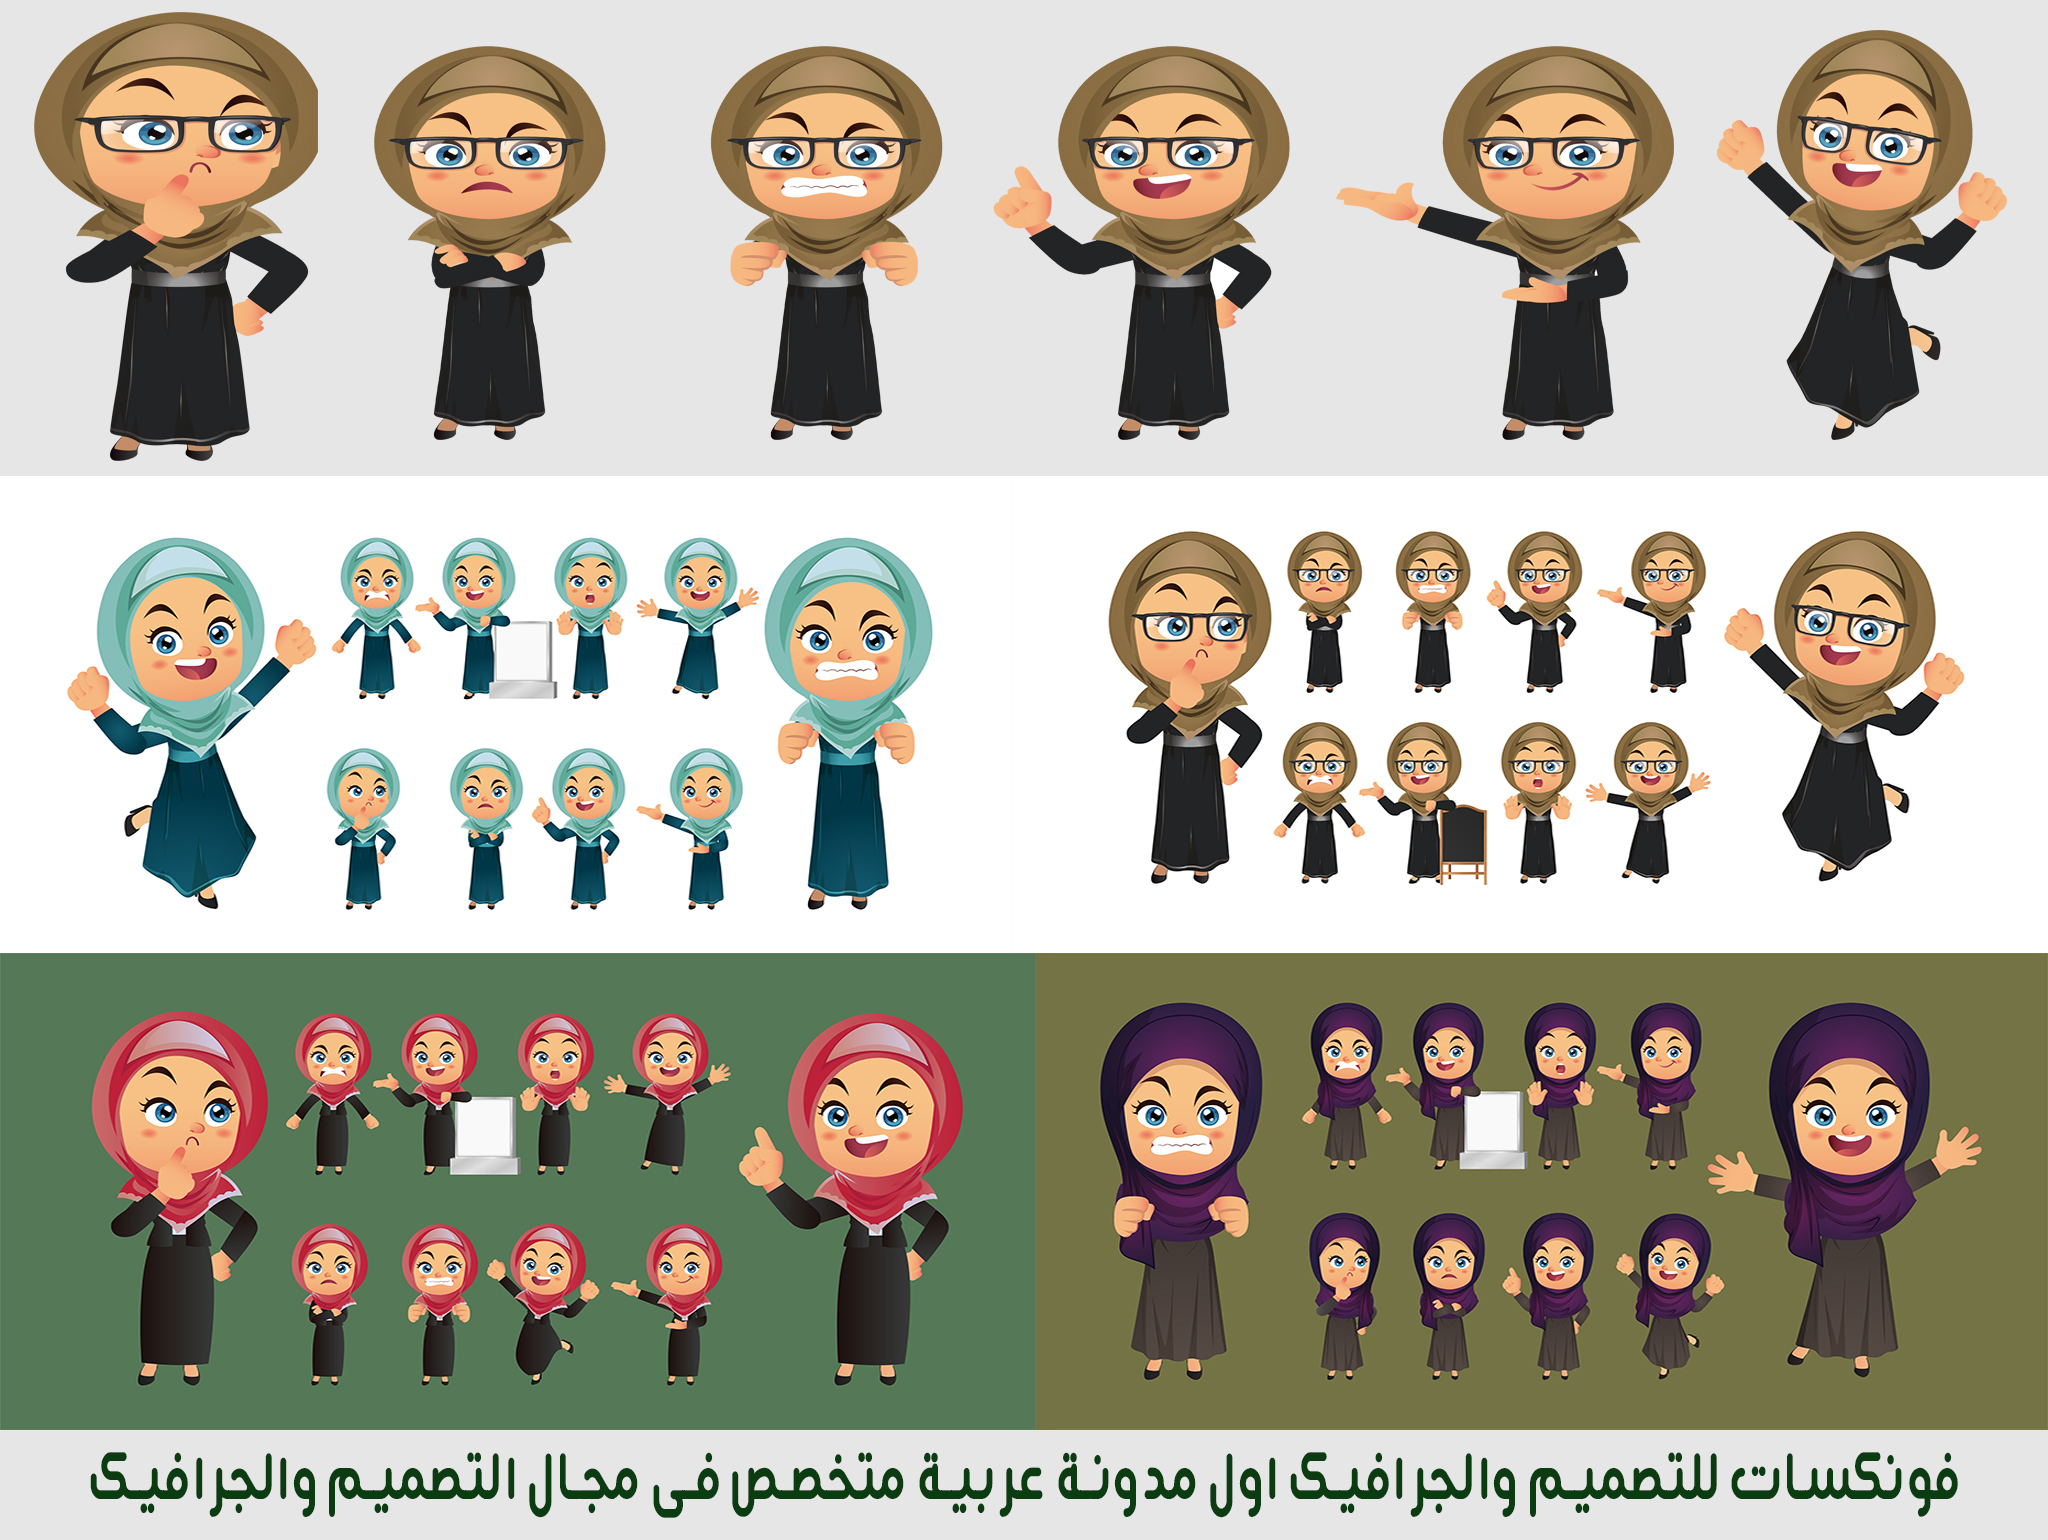 A collection of beautiful veiled Muslim children designs in Photoshop vector format